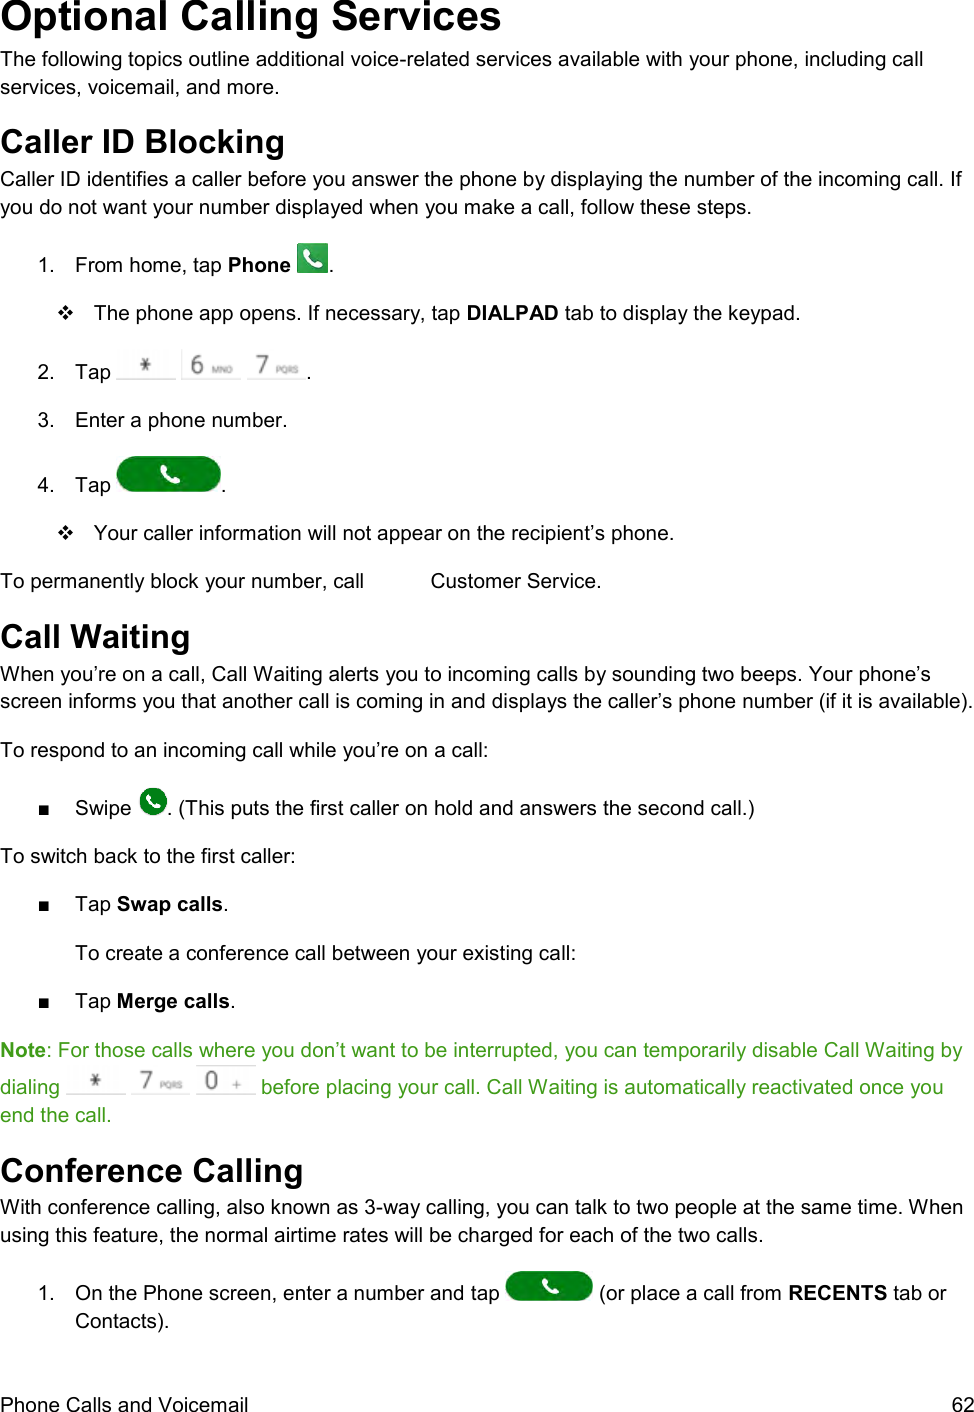  Phone Calls and Voicemail  62 Optional Calling Services The following topics outline additional voice-related services available with your phone, including call services, voicemail, and more. Caller ID Blocking  Caller ID identifies a caller before you answer the phone by displaying the number of the incoming call. If you do not want your number displayed when you make a call, follow these steps. 1.  From home, tap Phone  .   The phone app opens. If necessary, tap DIALPAD tab to display the keypad.  2.  Tap      . 3.  Enter a phone number. 4.  Tap  .   Your caller information will not appear on the recipient’s phone. To permanently block your number, call   Customer Service. Call Waiting  When you’re on a call, Call Waiting alerts you to incoming calls by sounding two beeps. Your phone’s screen informs you that another call is coming in and displays the caller’s phone number (if it is available). To respond to an incoming call while you’re on a call: ■  Swipe  . (This puts the first caller on hold and answers the second call.) To switch back to the first caller: ■  Tap Swap calls. To create a conference call between your existing call: ■  Tap Merge calls. Note: For those calls where you don’t want to be interrupted, you can temporarily disable Call Waiting by dialing       before placing your call. Call Waiting is automatically reactivated once you end the call. Conference Calling  With conference calling, also known as 3-way calling, you can talk to two people at the same time. When using this feature, the normal airtime rates will be charged for each of the two calls. 1.  On the Phone screen, enter a number and tap   (or place a call from RECENTS tab or Contacts). 